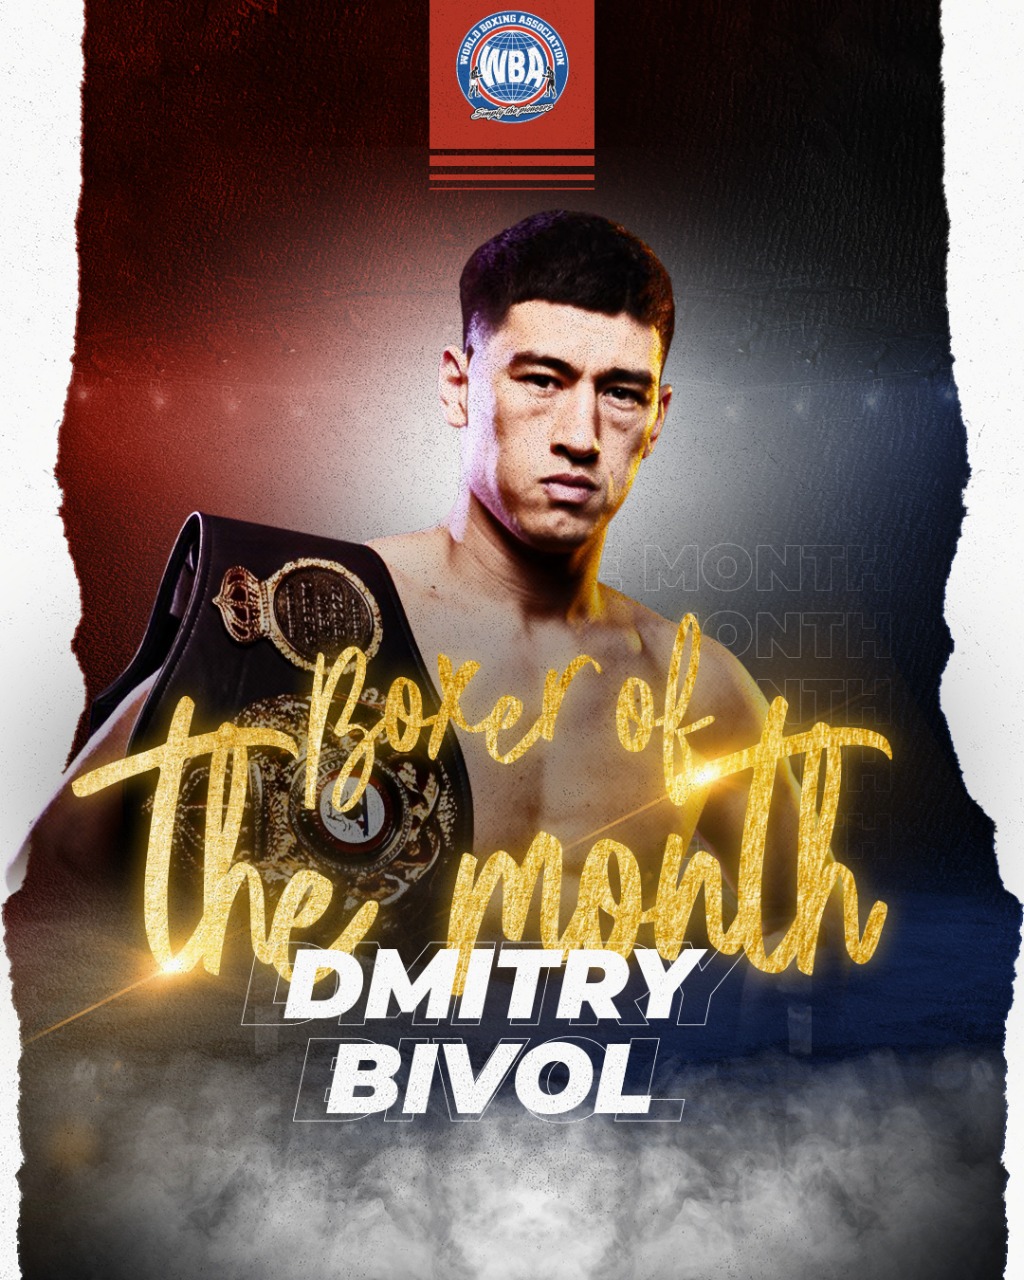 Bivol awarded as WBA Boxer of the Month